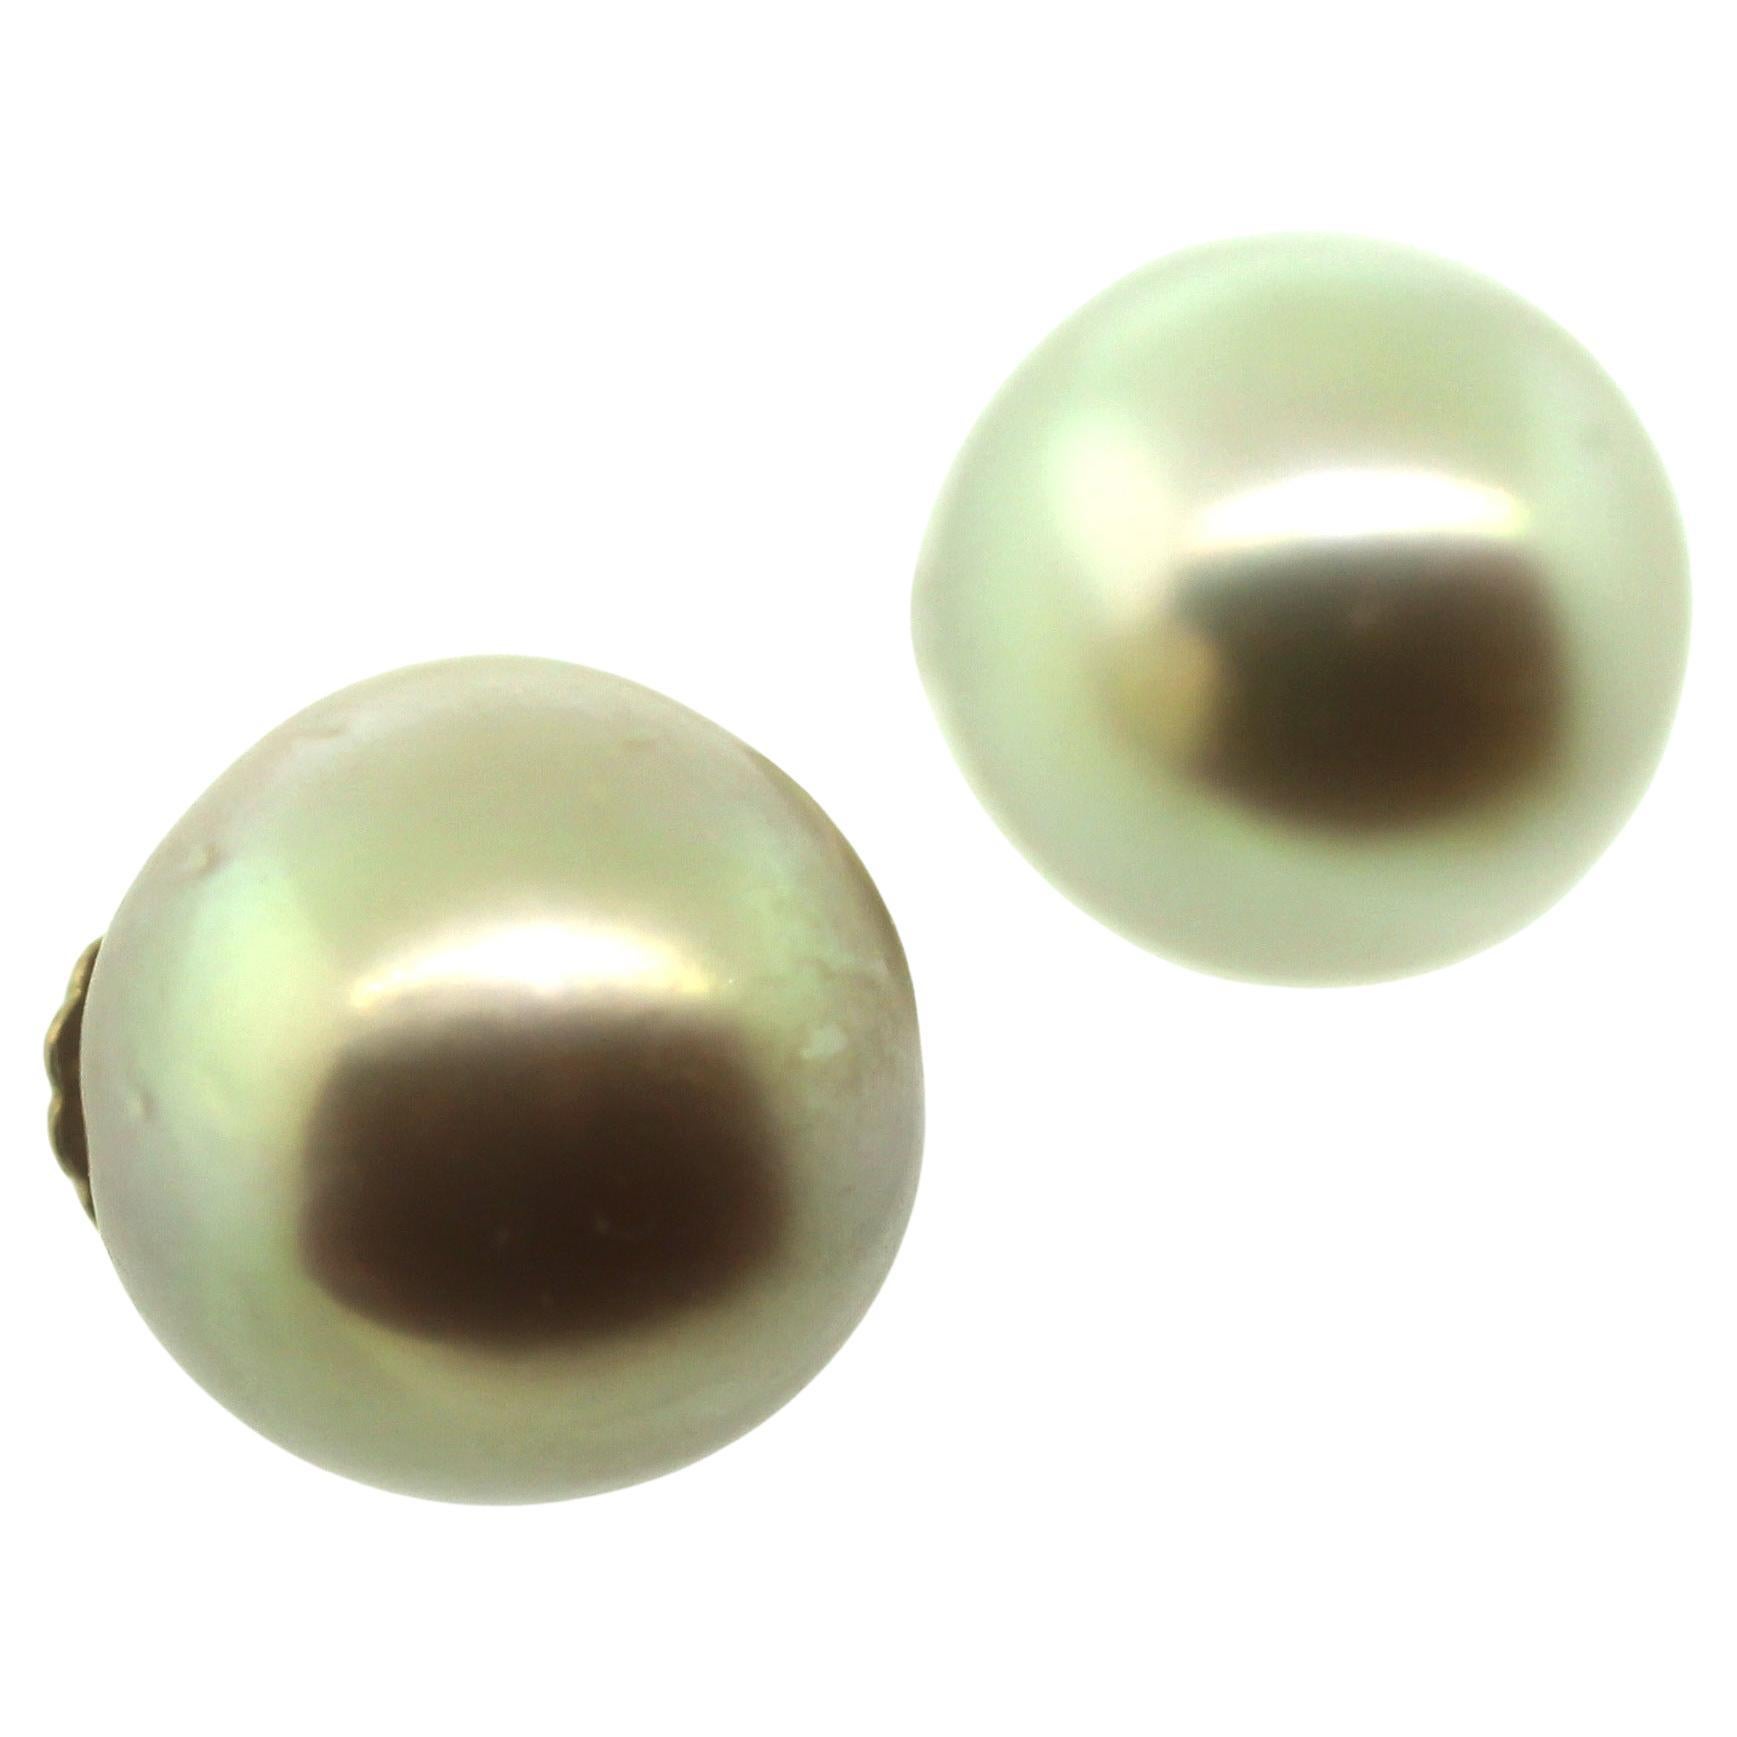 Hakimoto By Jewel Of Ocean
Natural color Golden South Sea Pearls Stud